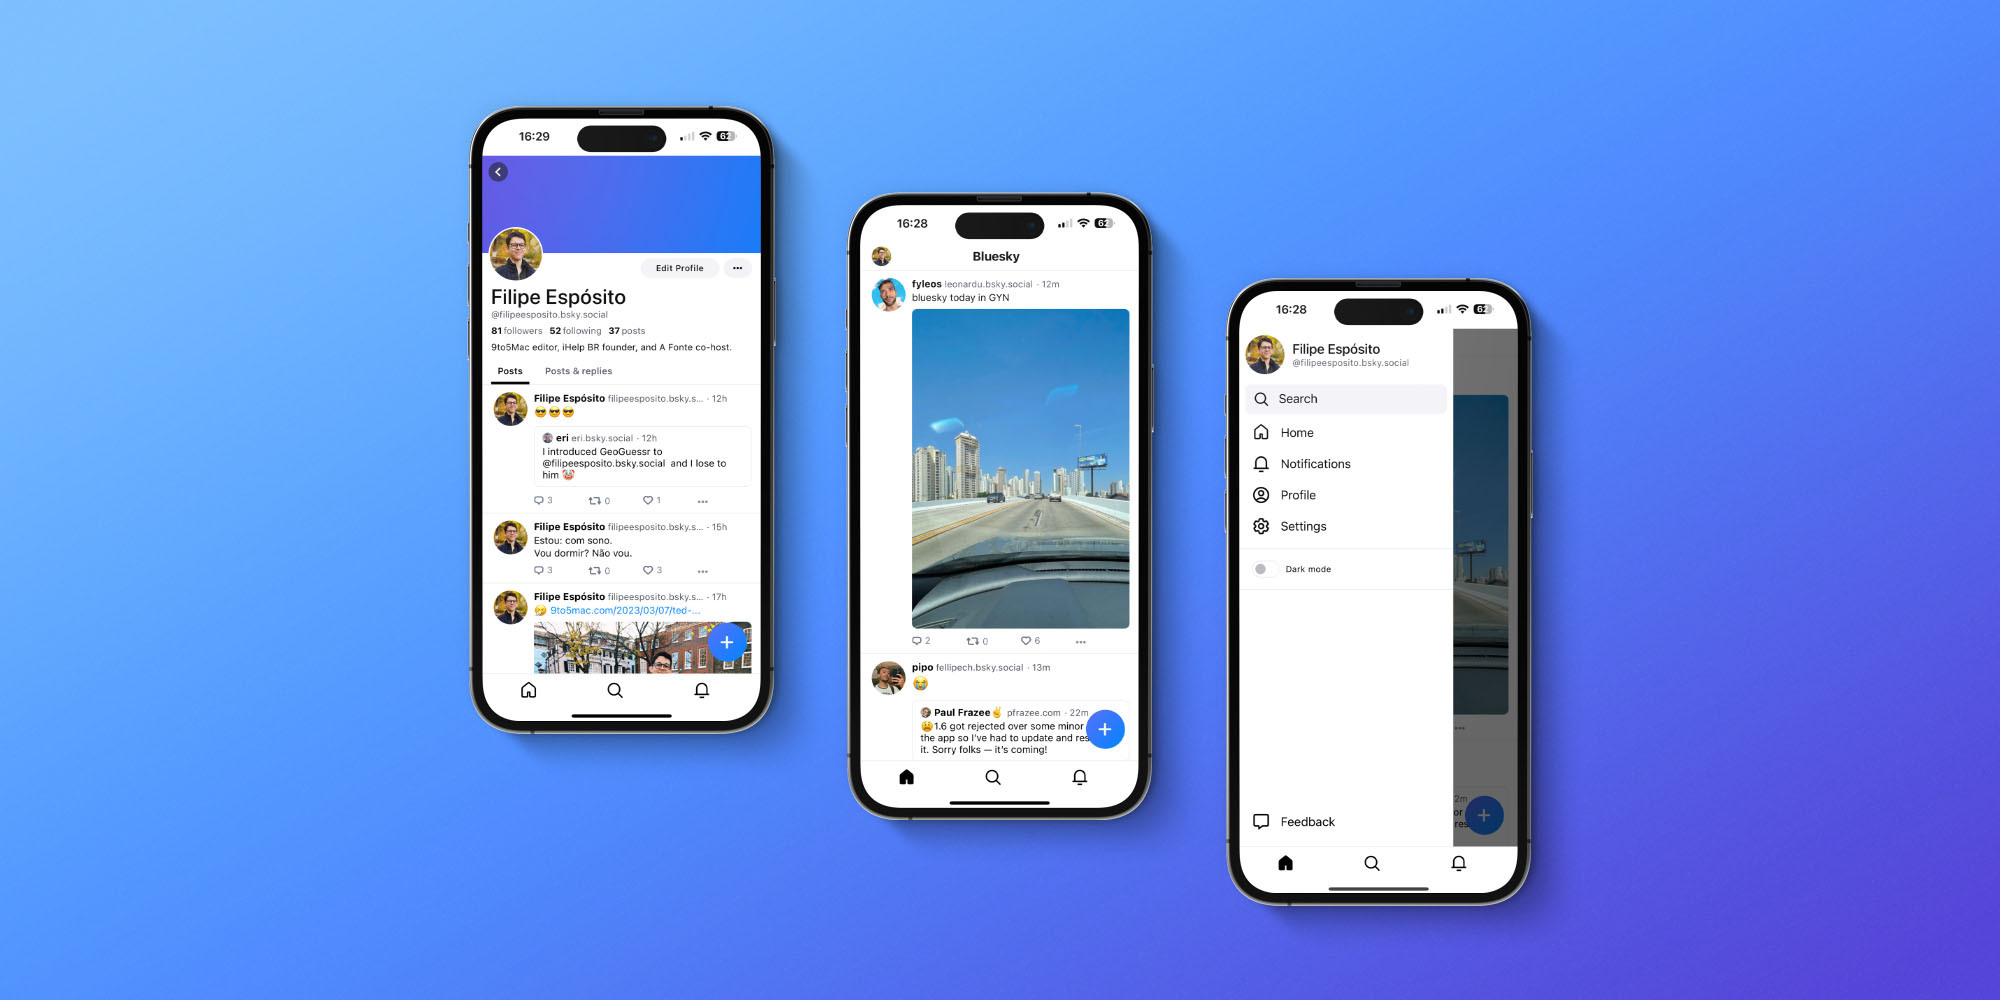 Here’s a first look at Bluesky, the decentralized social network from Twitter’s cofounder